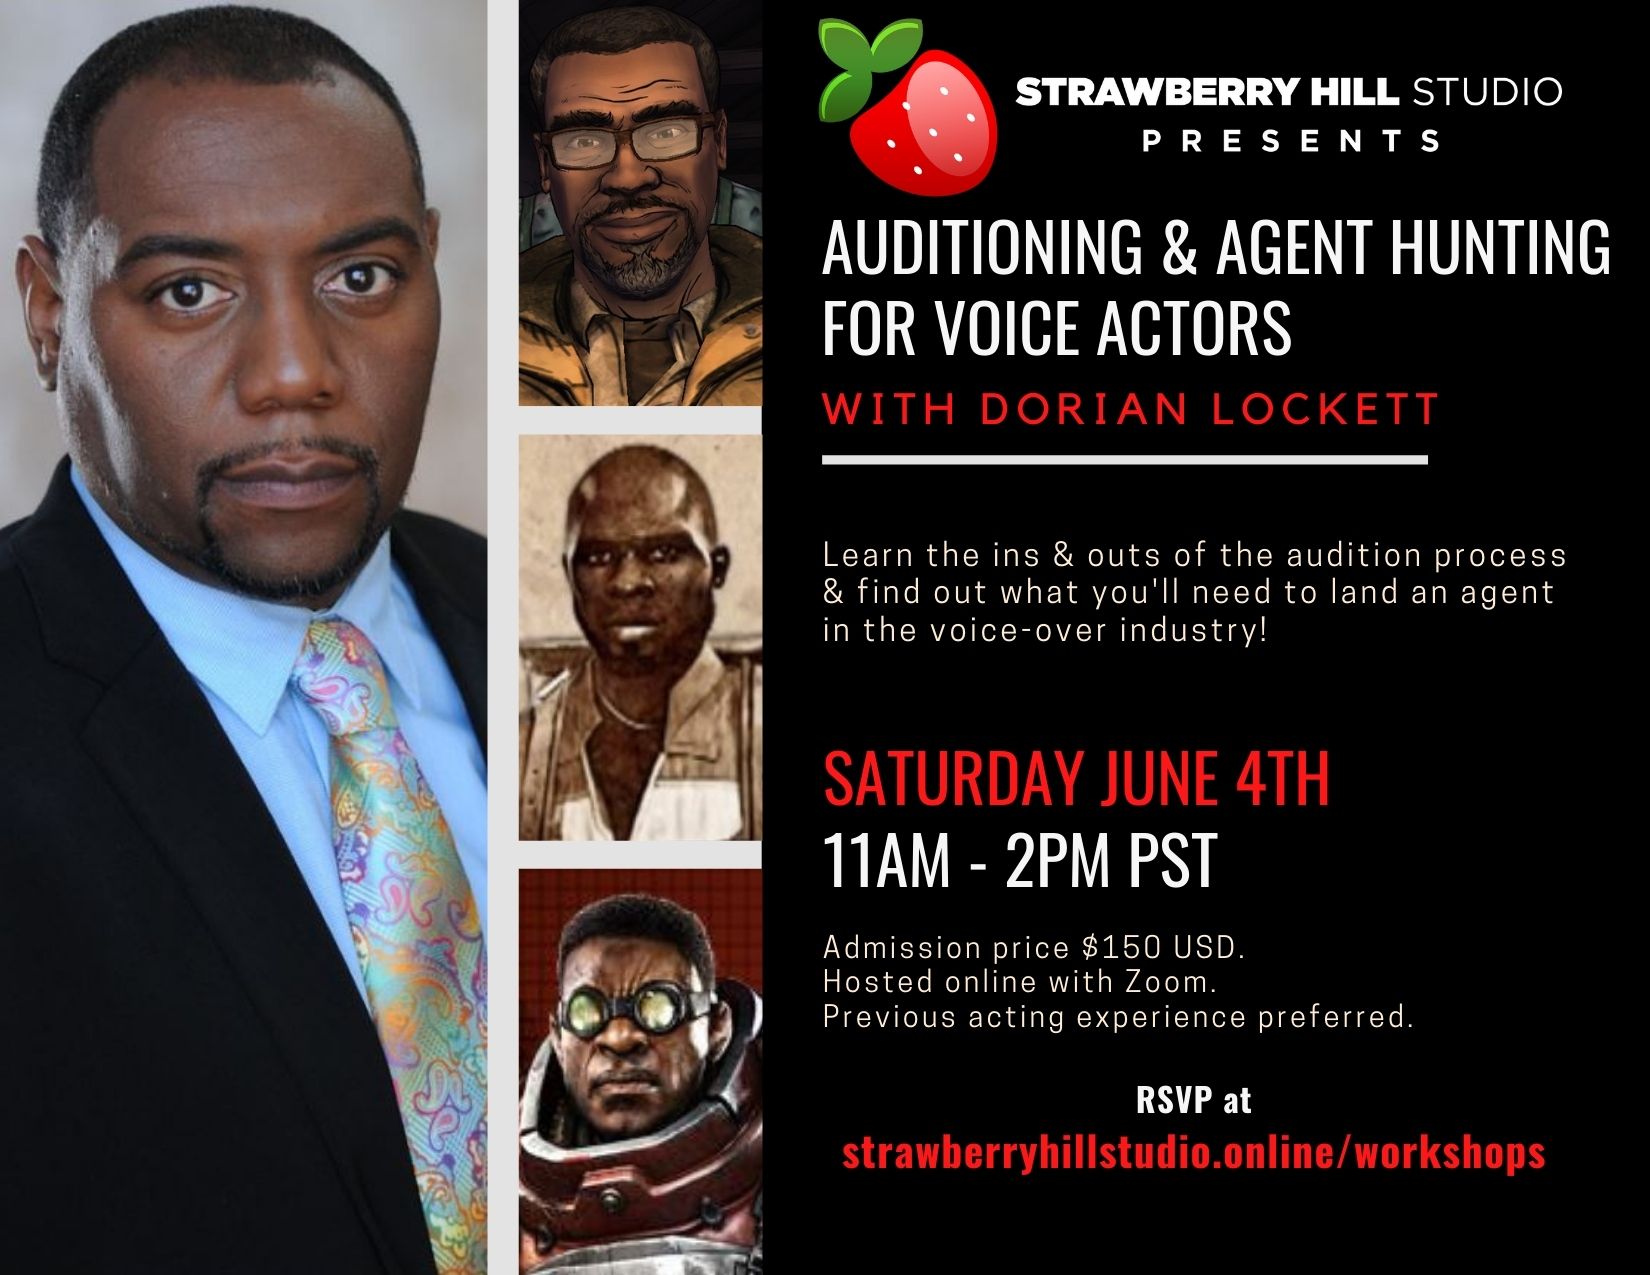 NEW DATE - Auditioning & Agent Hunting for Voice Actors w/ Dorian Lockett